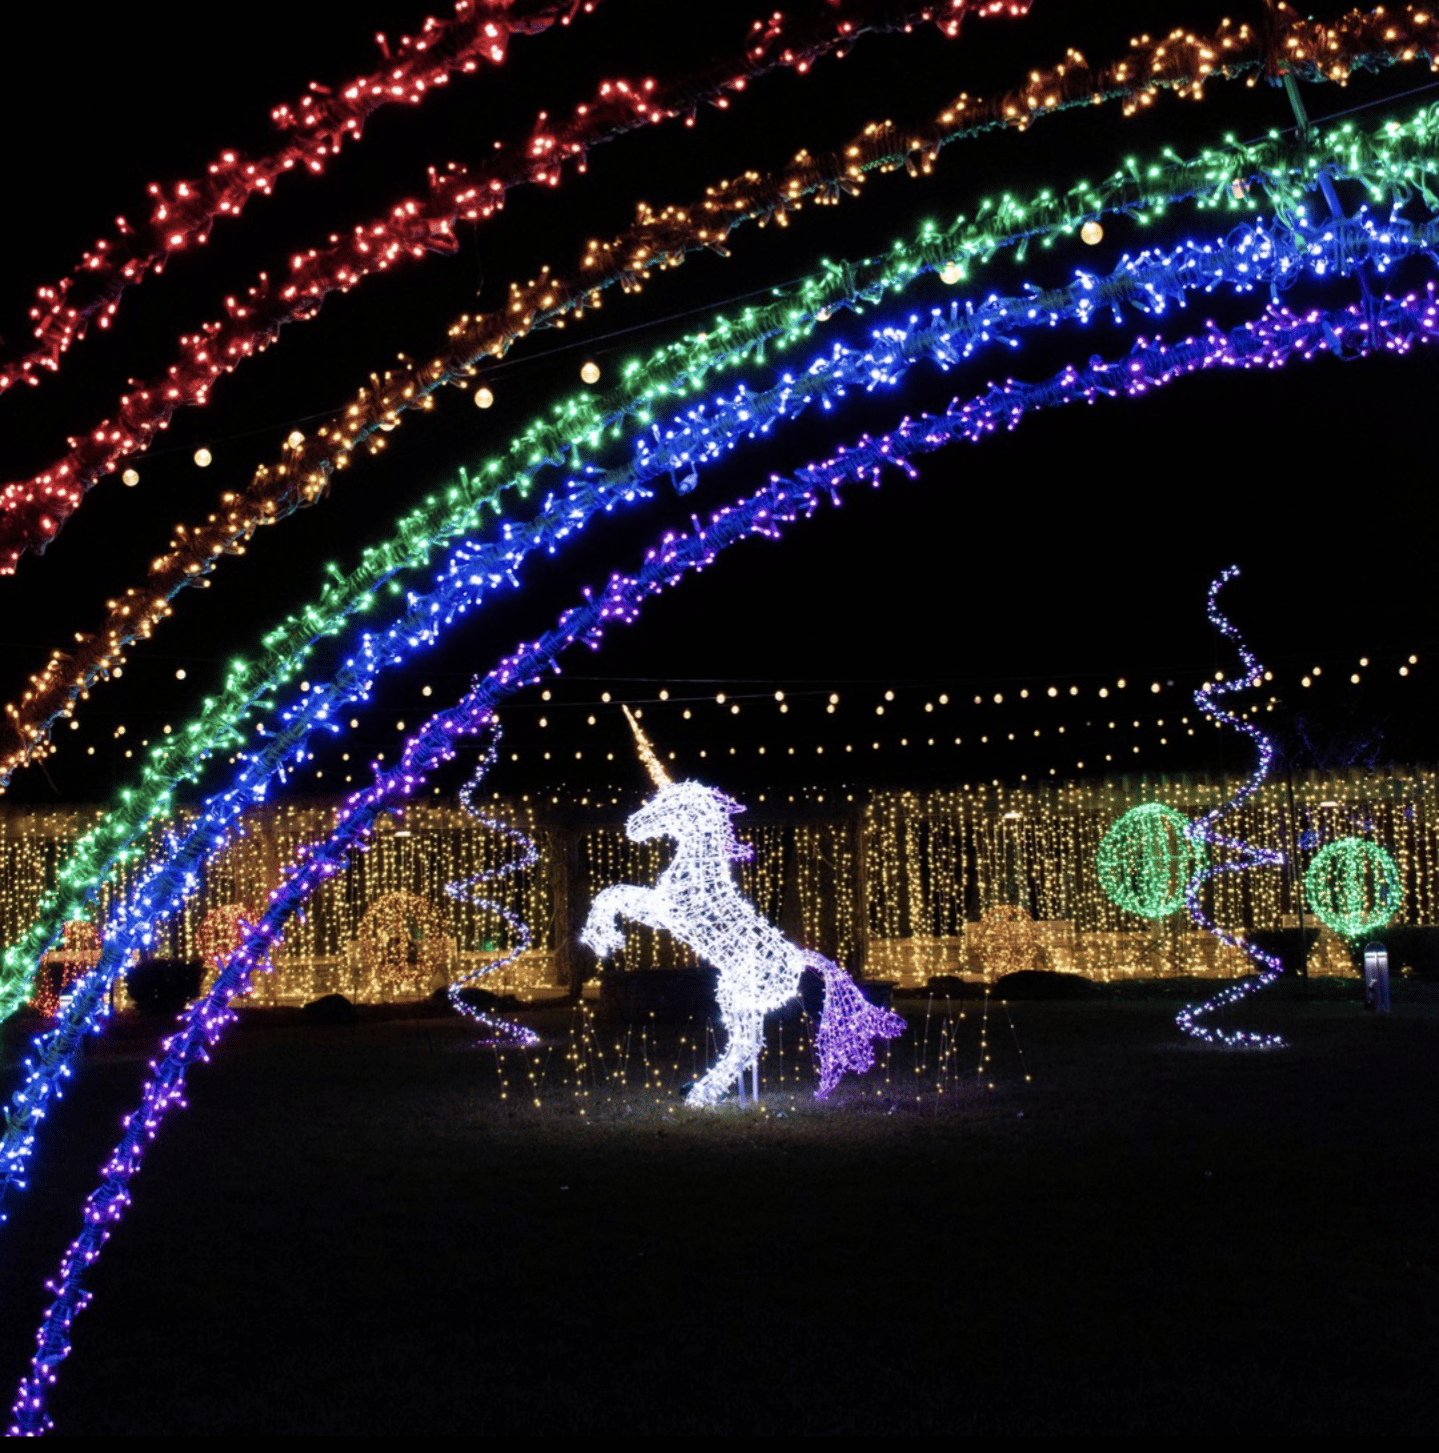 Night with christmas lights forming a rainbow over a unicorn